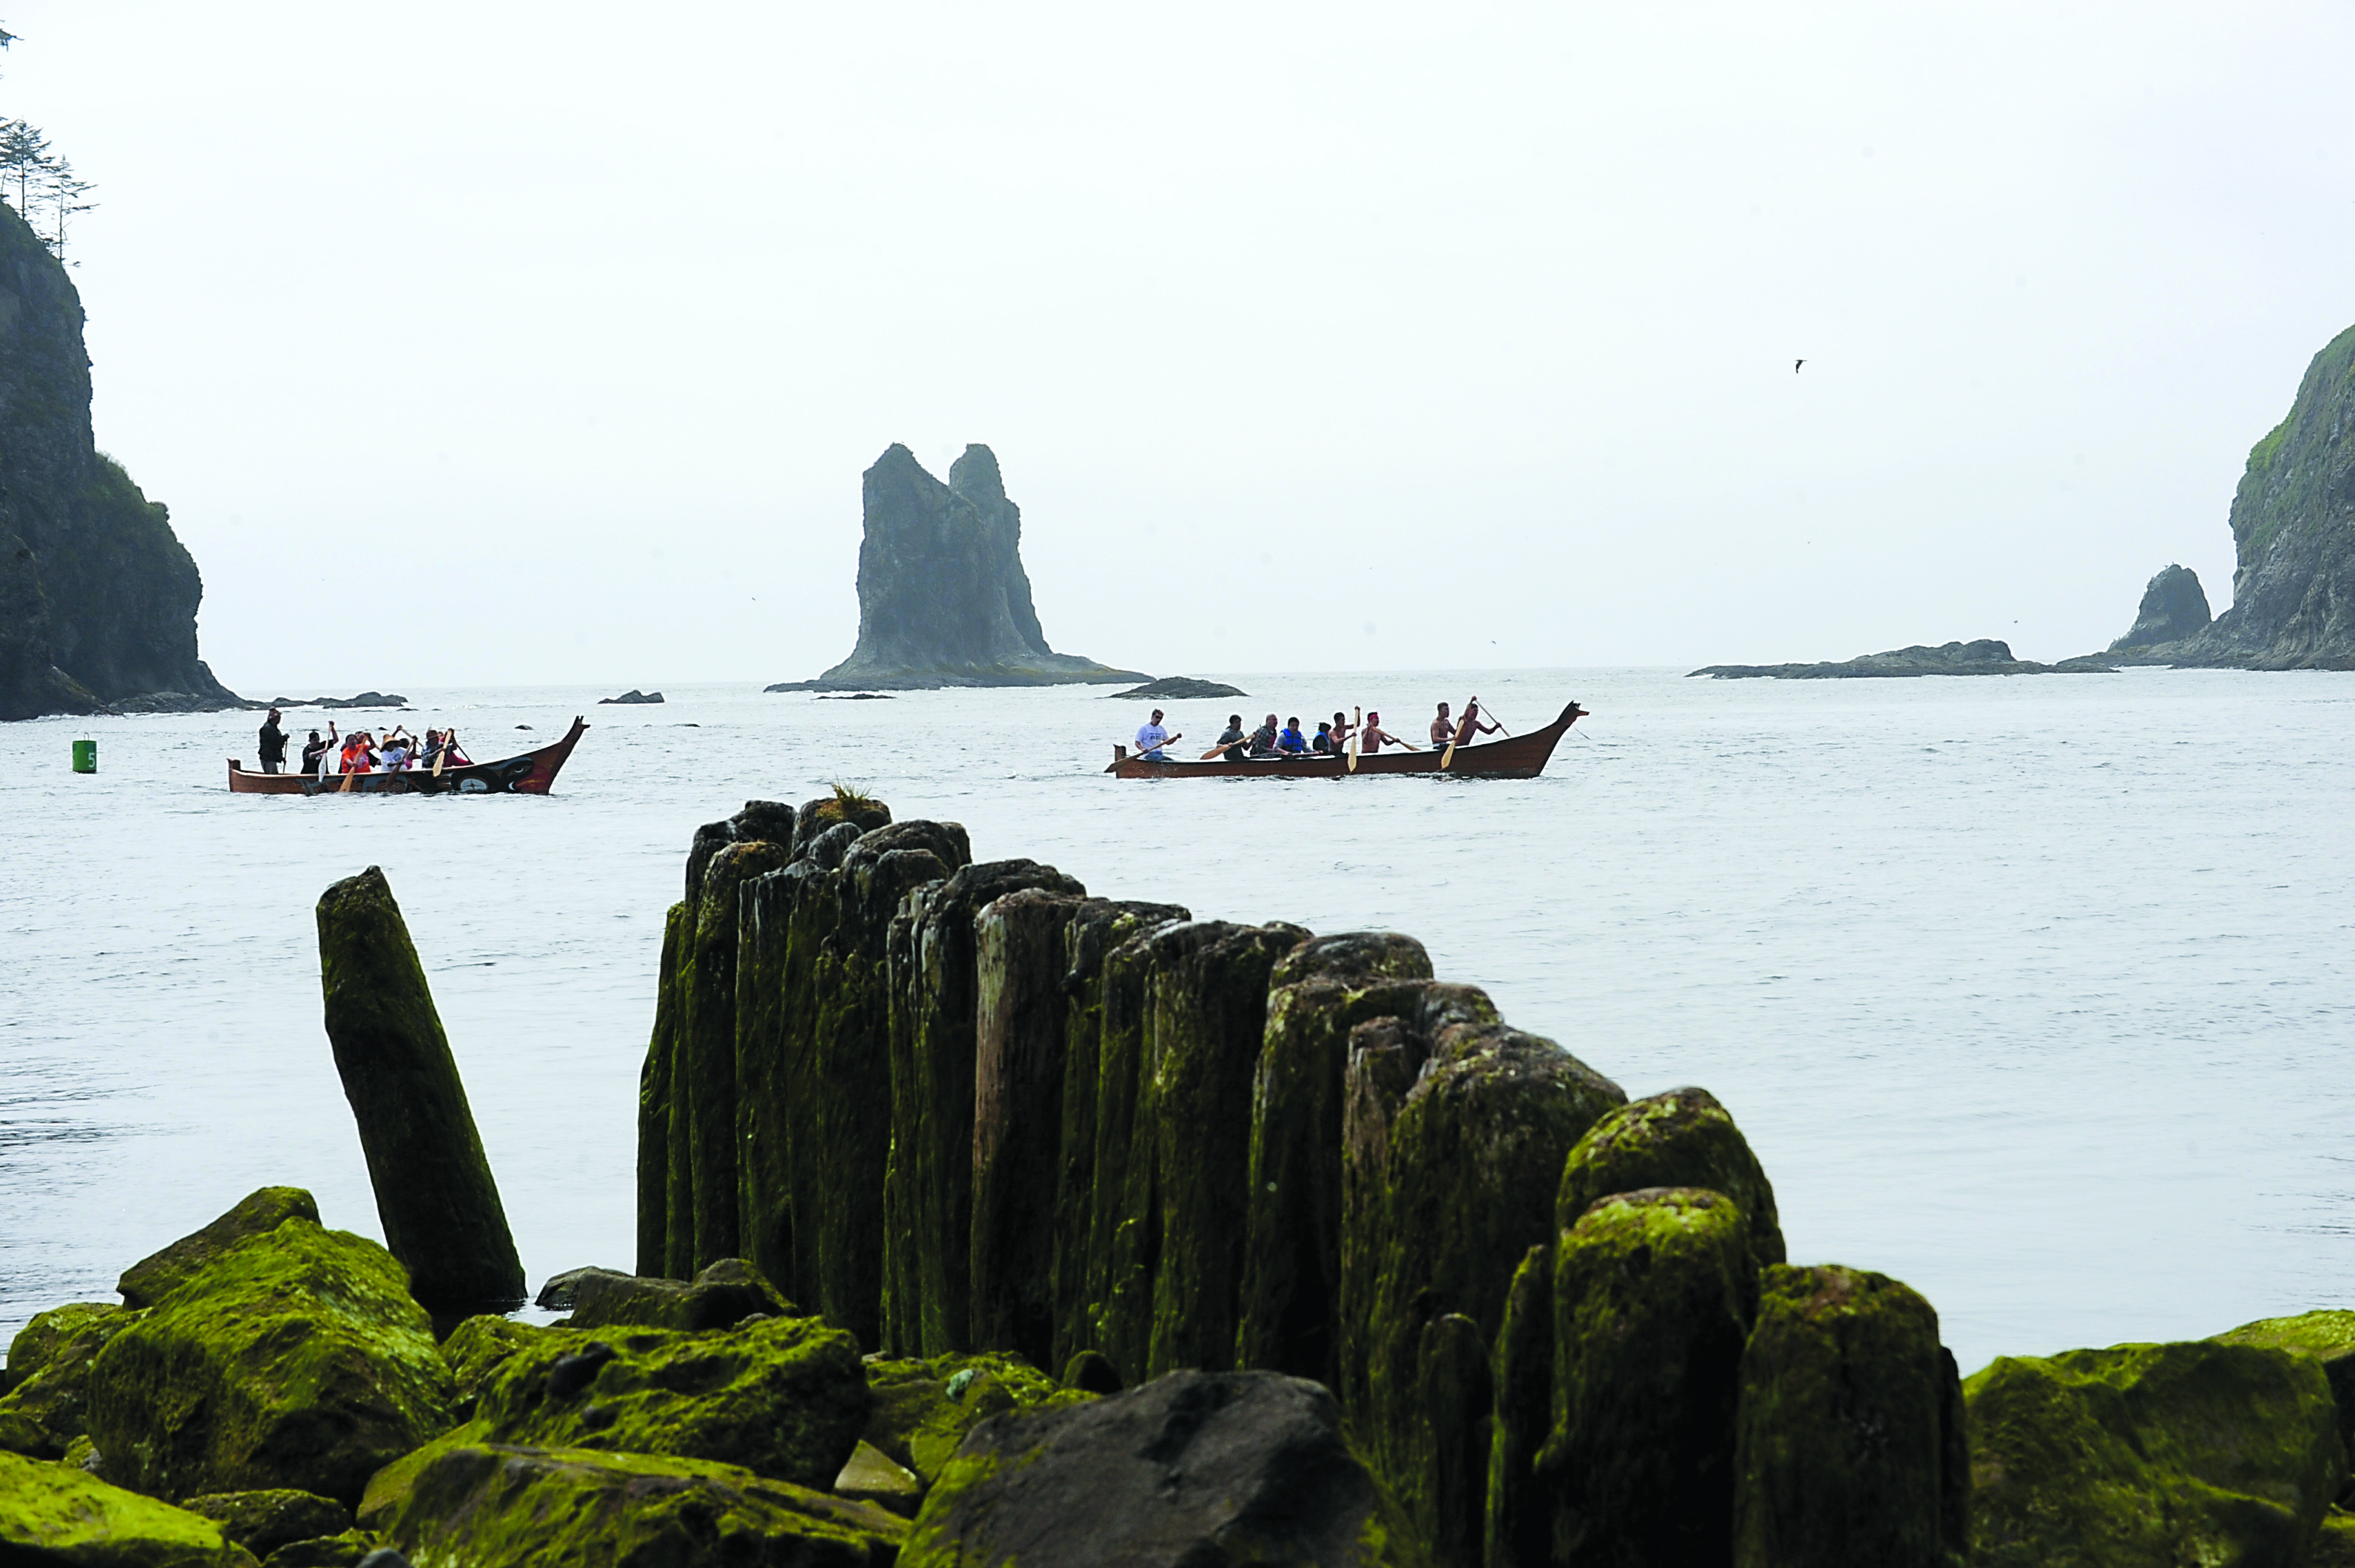 Two Quileute tribal welcoming canoes head up the Quillayute River on Thursday as they await paddlers coming into LaPush. Lonnie Archibald/for Peninsula Daily News